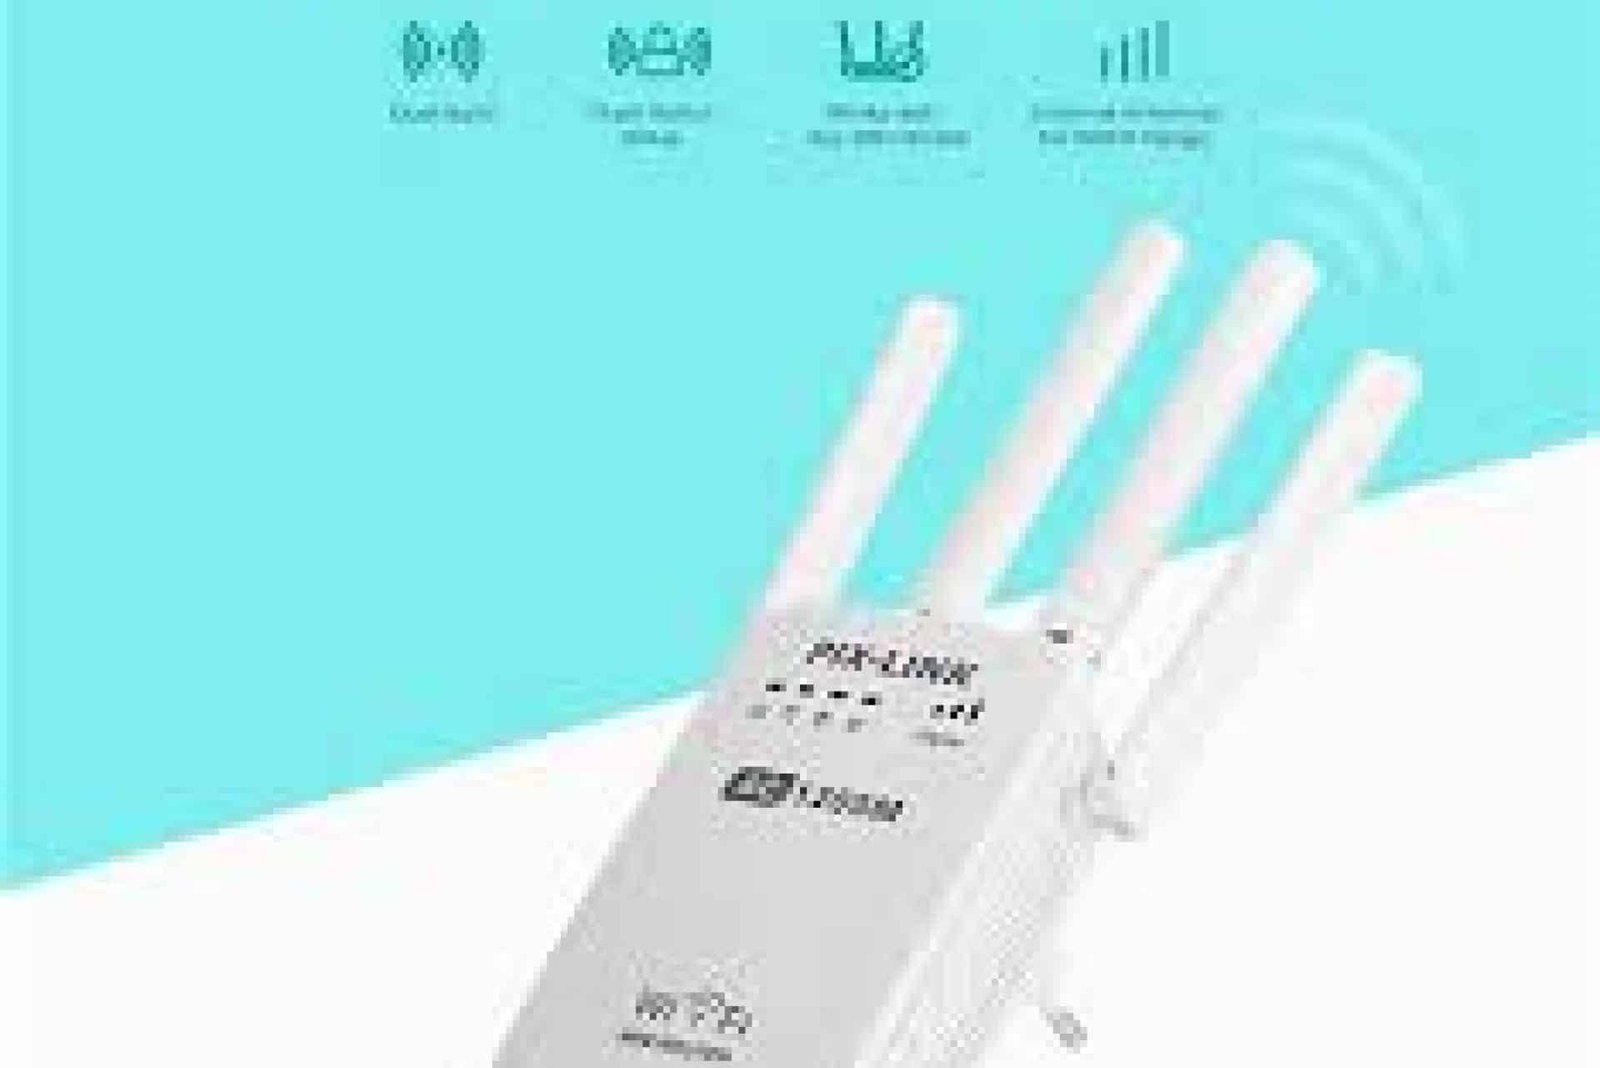 Pix Link WiFi Repeater